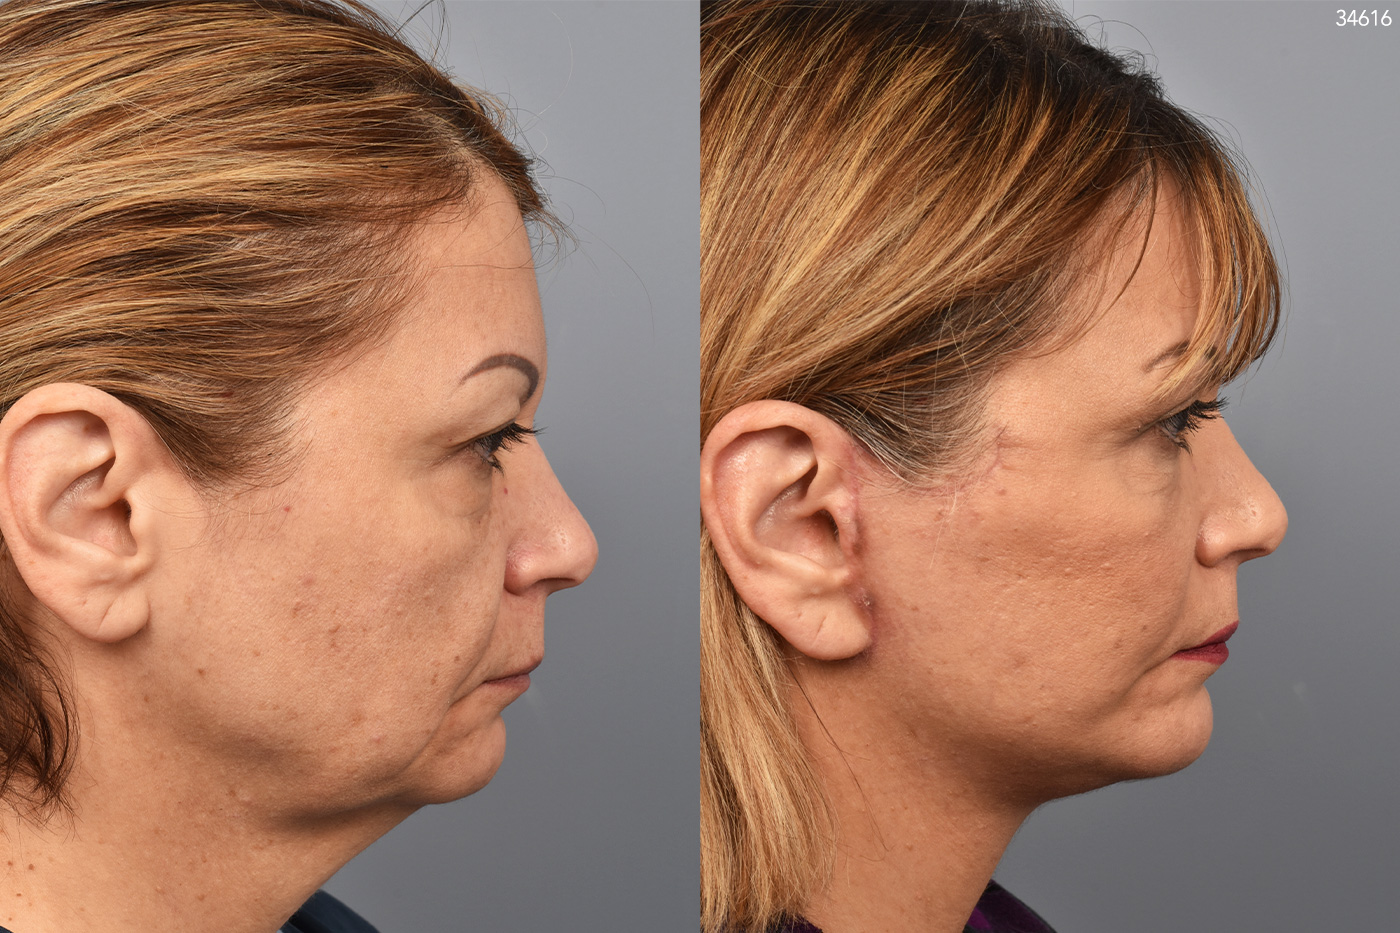 patient before and after facelift, chin implant, upper bleph photos of female